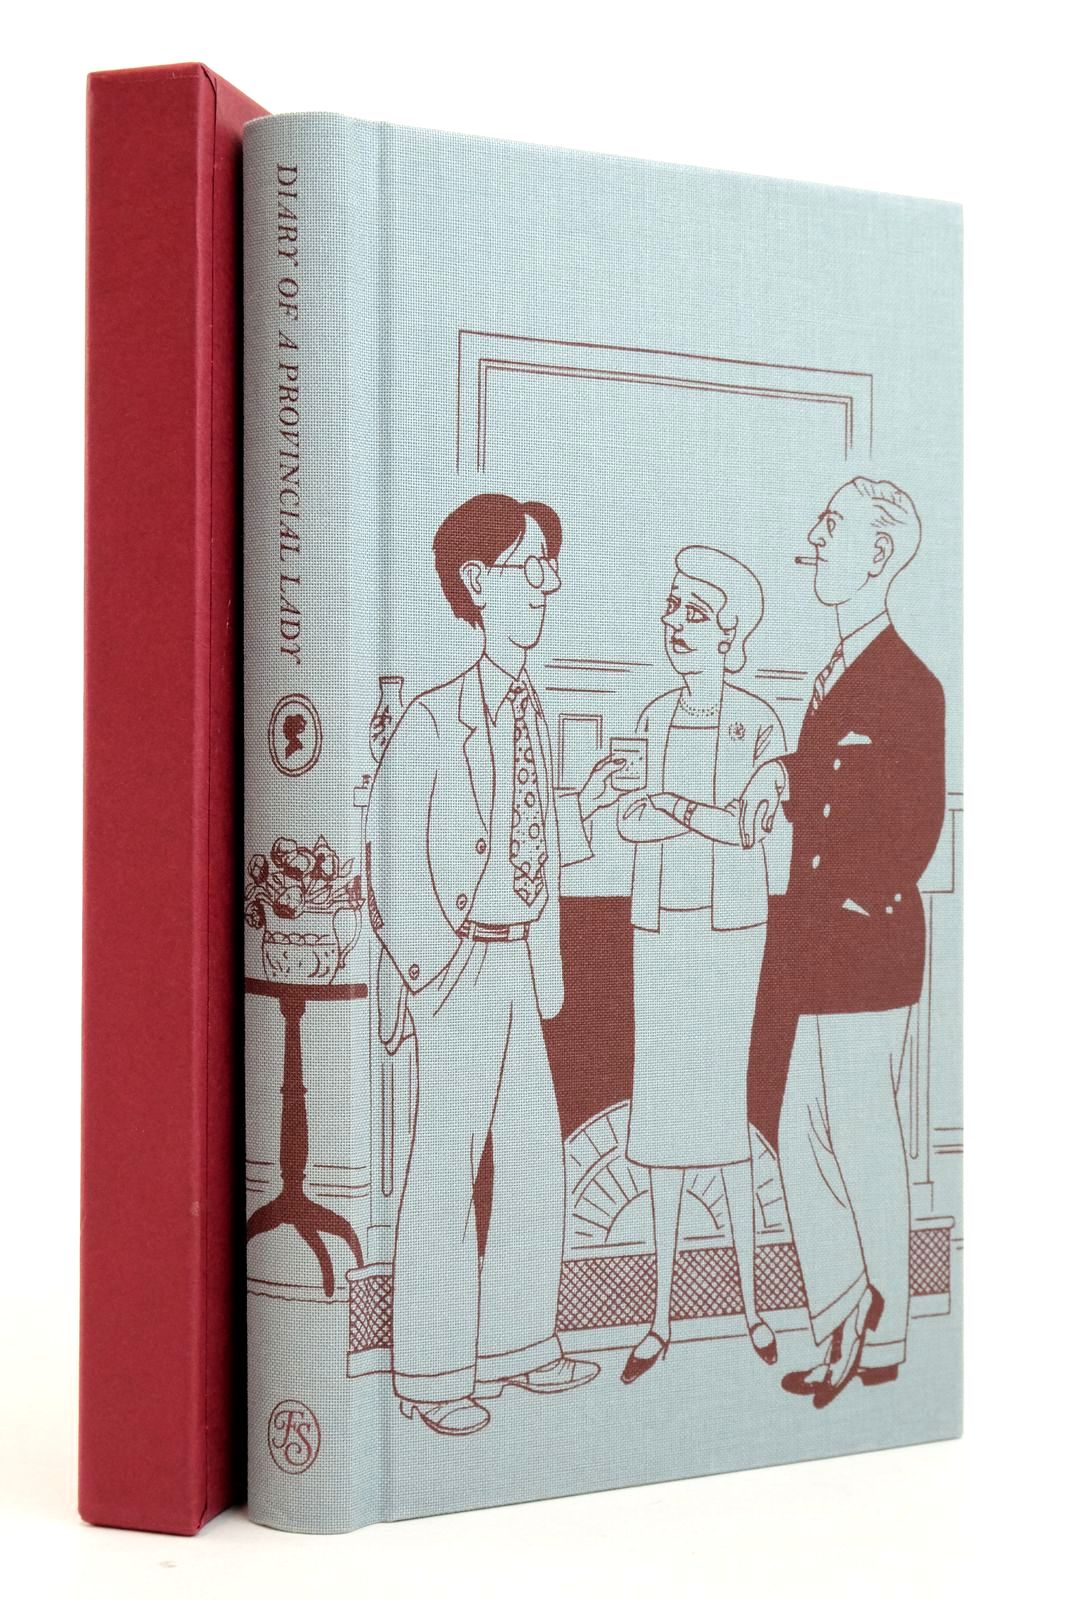 Photo of DIARY OF A PROVINCIAL LADY written by Delafield, E.M. Cooper, Jilly illustrated by Bentley, Nicolas published by Folio Society (STOCK CODE: 2136725)  for sale by Stella & Rose's Books